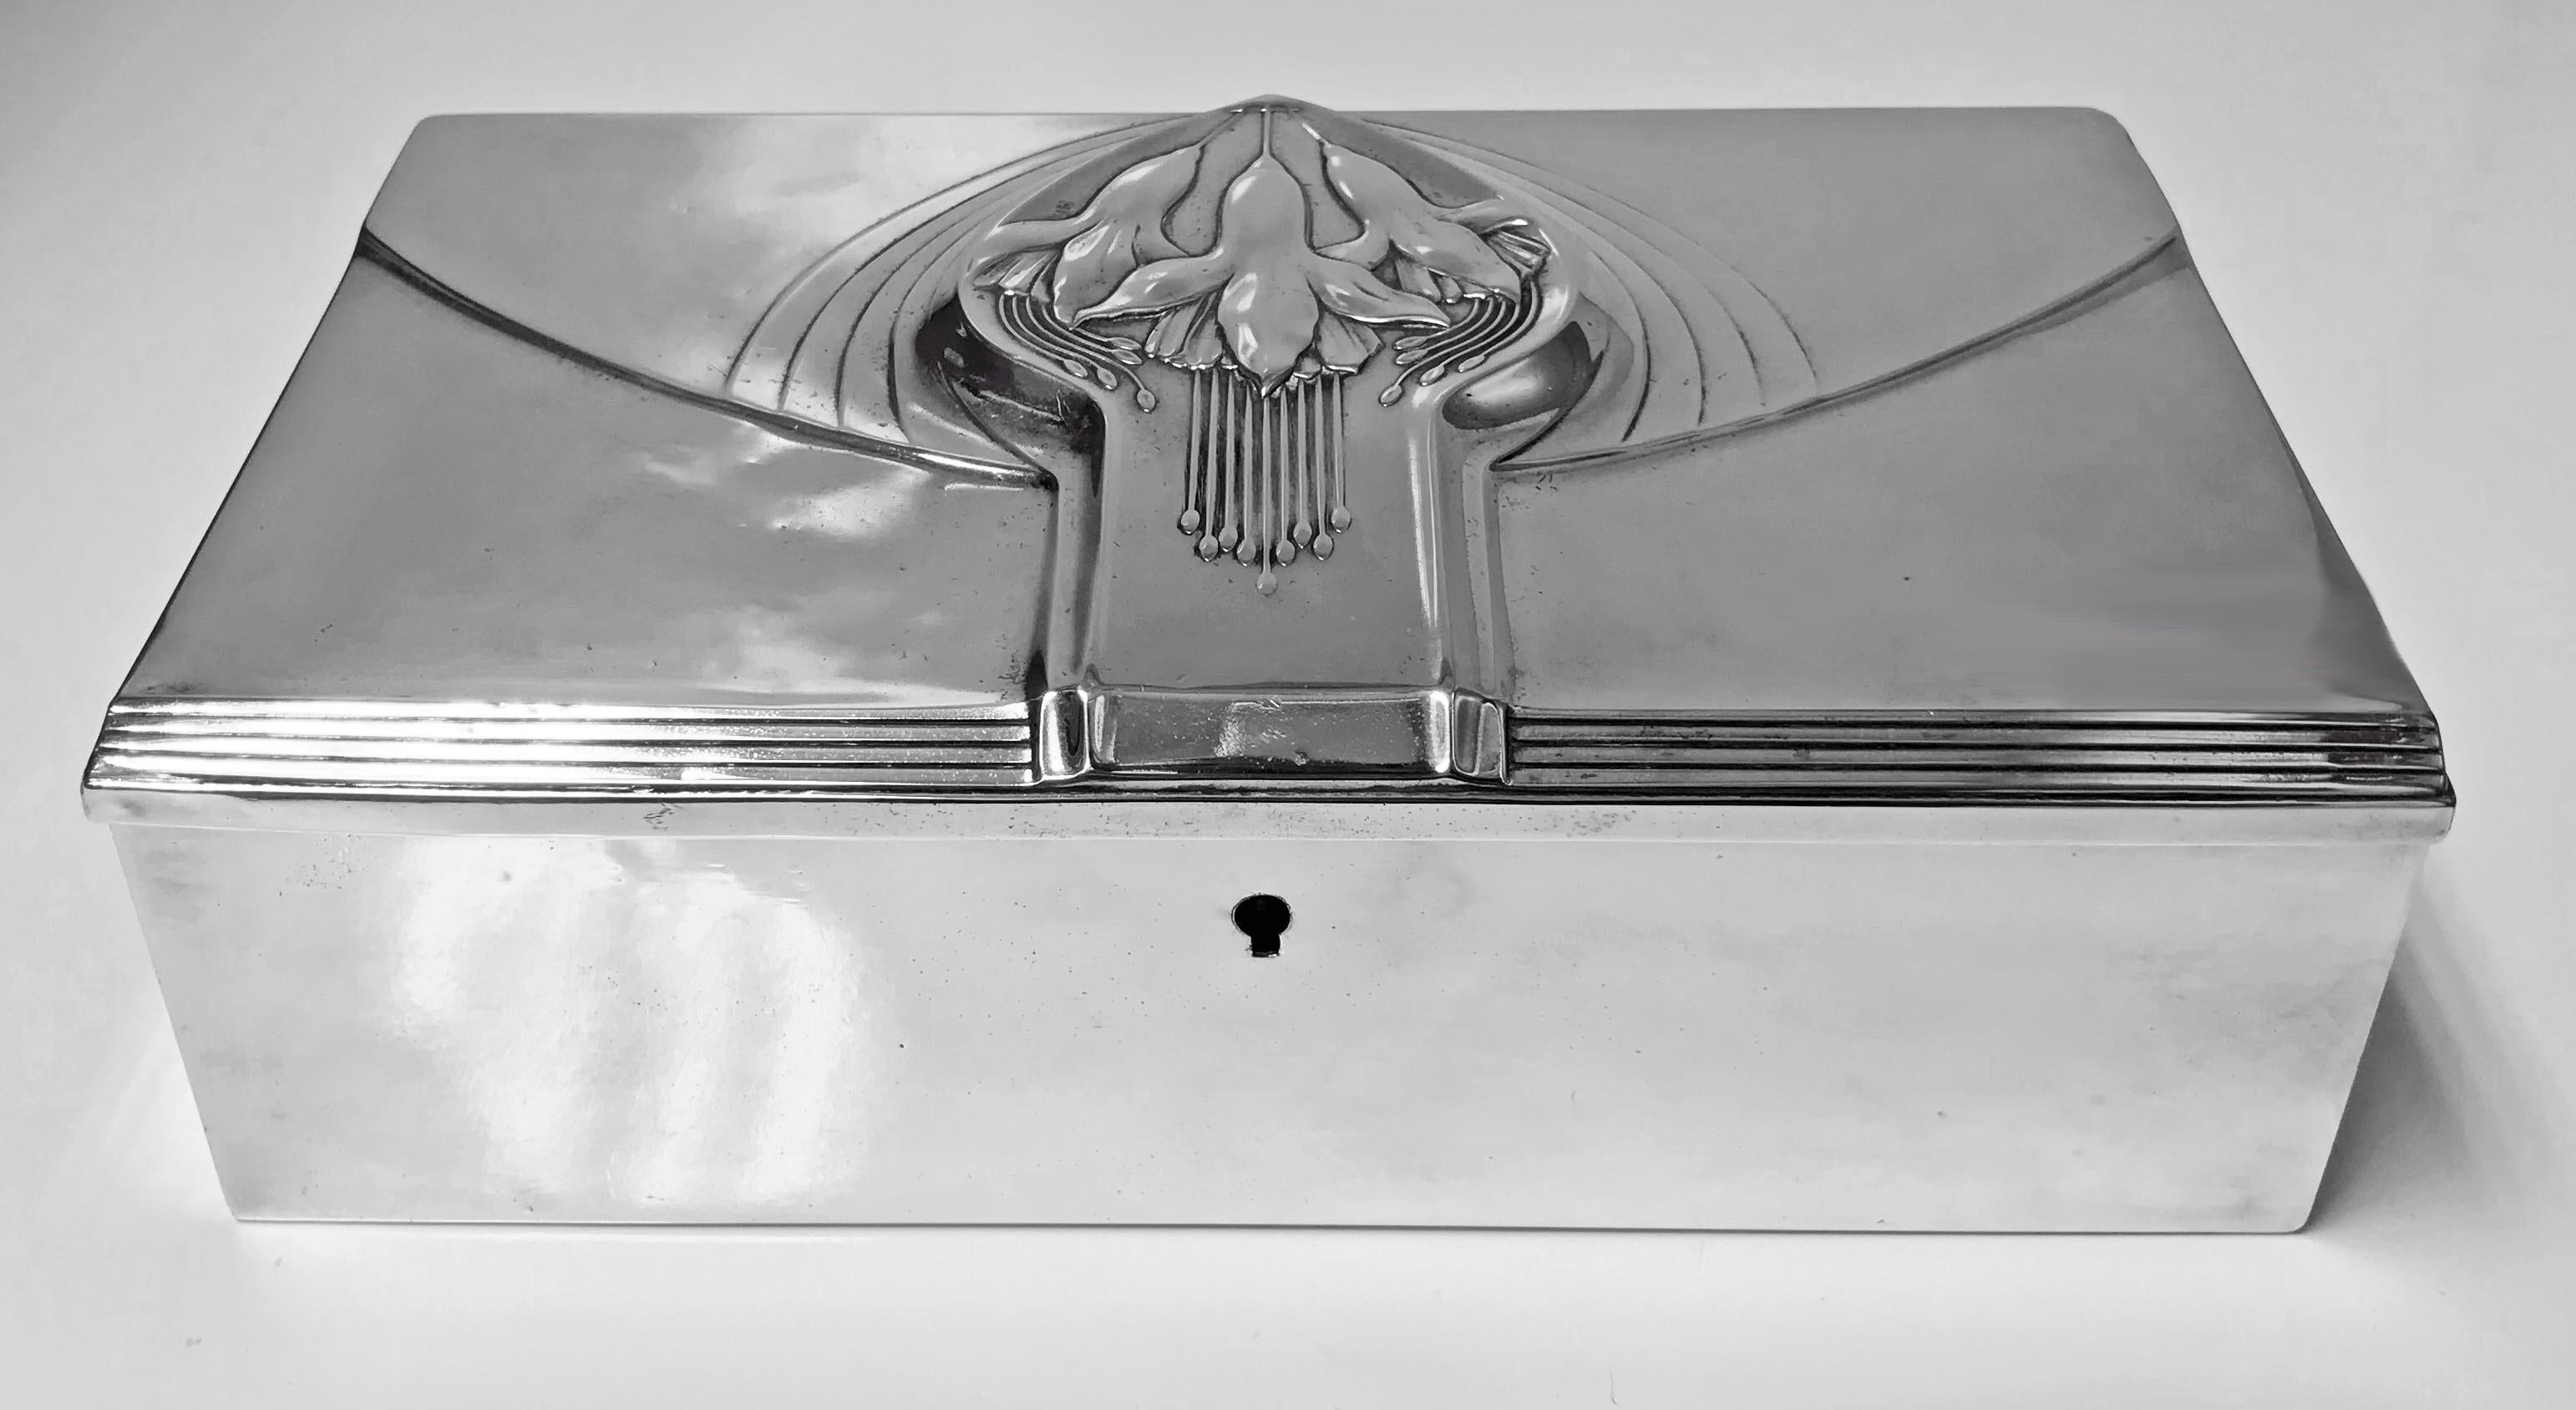 Jugendstil Nouveau Secessionist Silver plate Jewellery Box, WMF Germany C.1906. The large rectangular box with stylised raised foliate hinged cover, plain sides. Satin silk lined interior. WMF marks on underside. Measures: 8.75 x 5.50 x 2.50 inches.